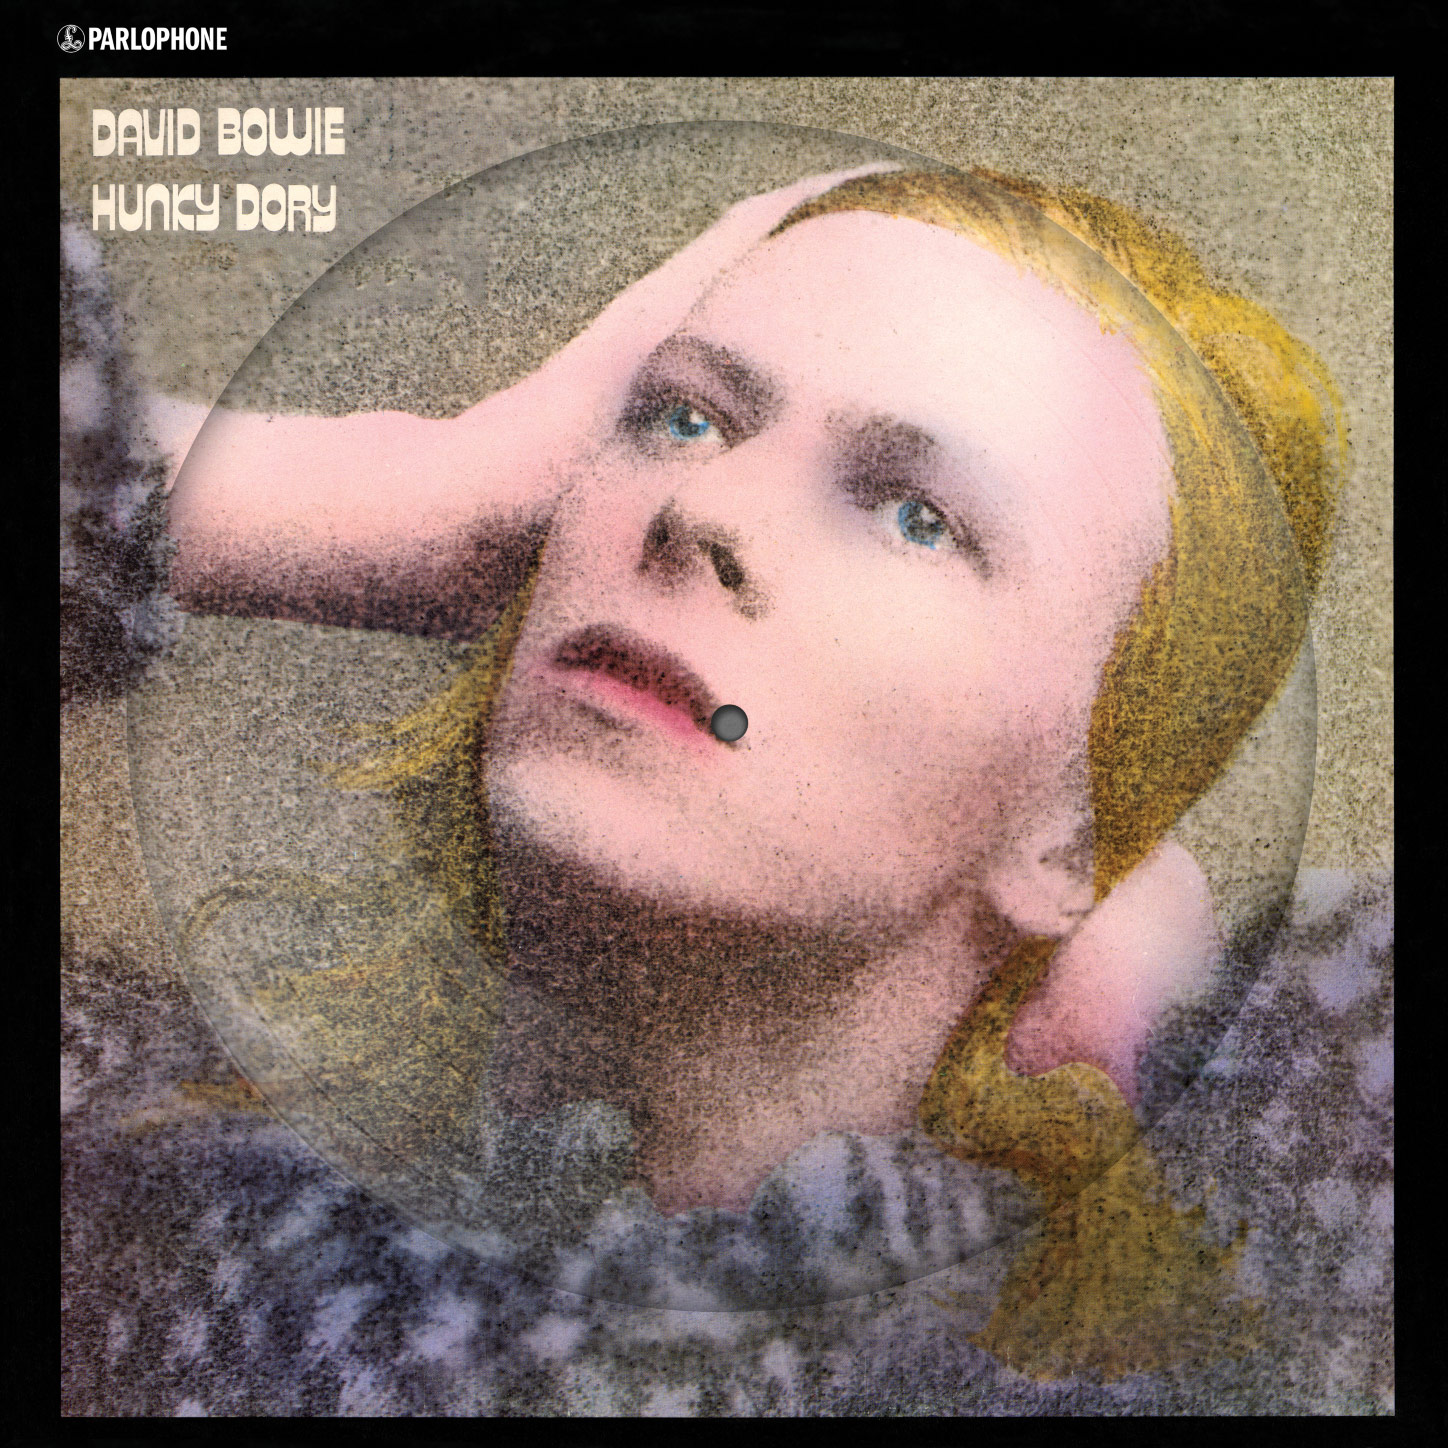 David Bowie / Hunky Dory 50th anniversary vinyl picture disc